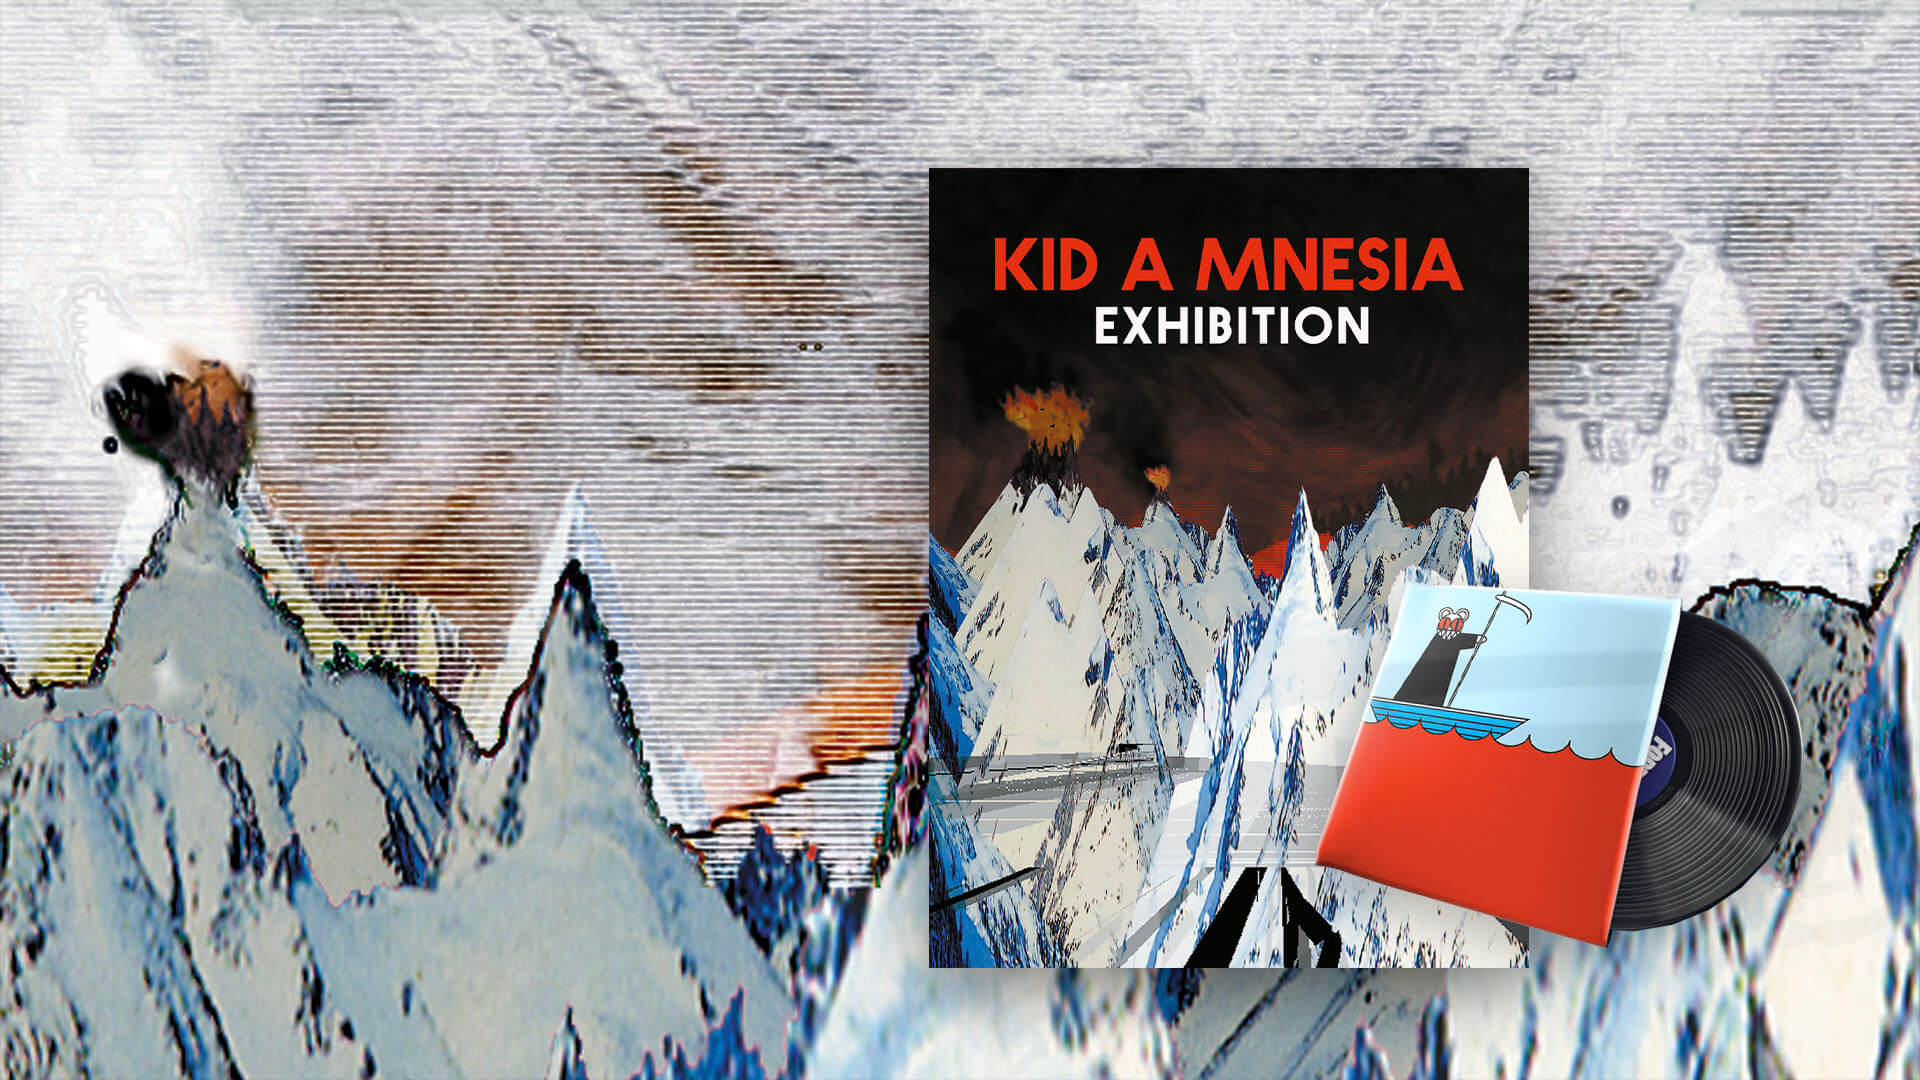 Unlock Free Radiohead Items in Fortnite based on the KID A MNESIA EXHIBITION Experience